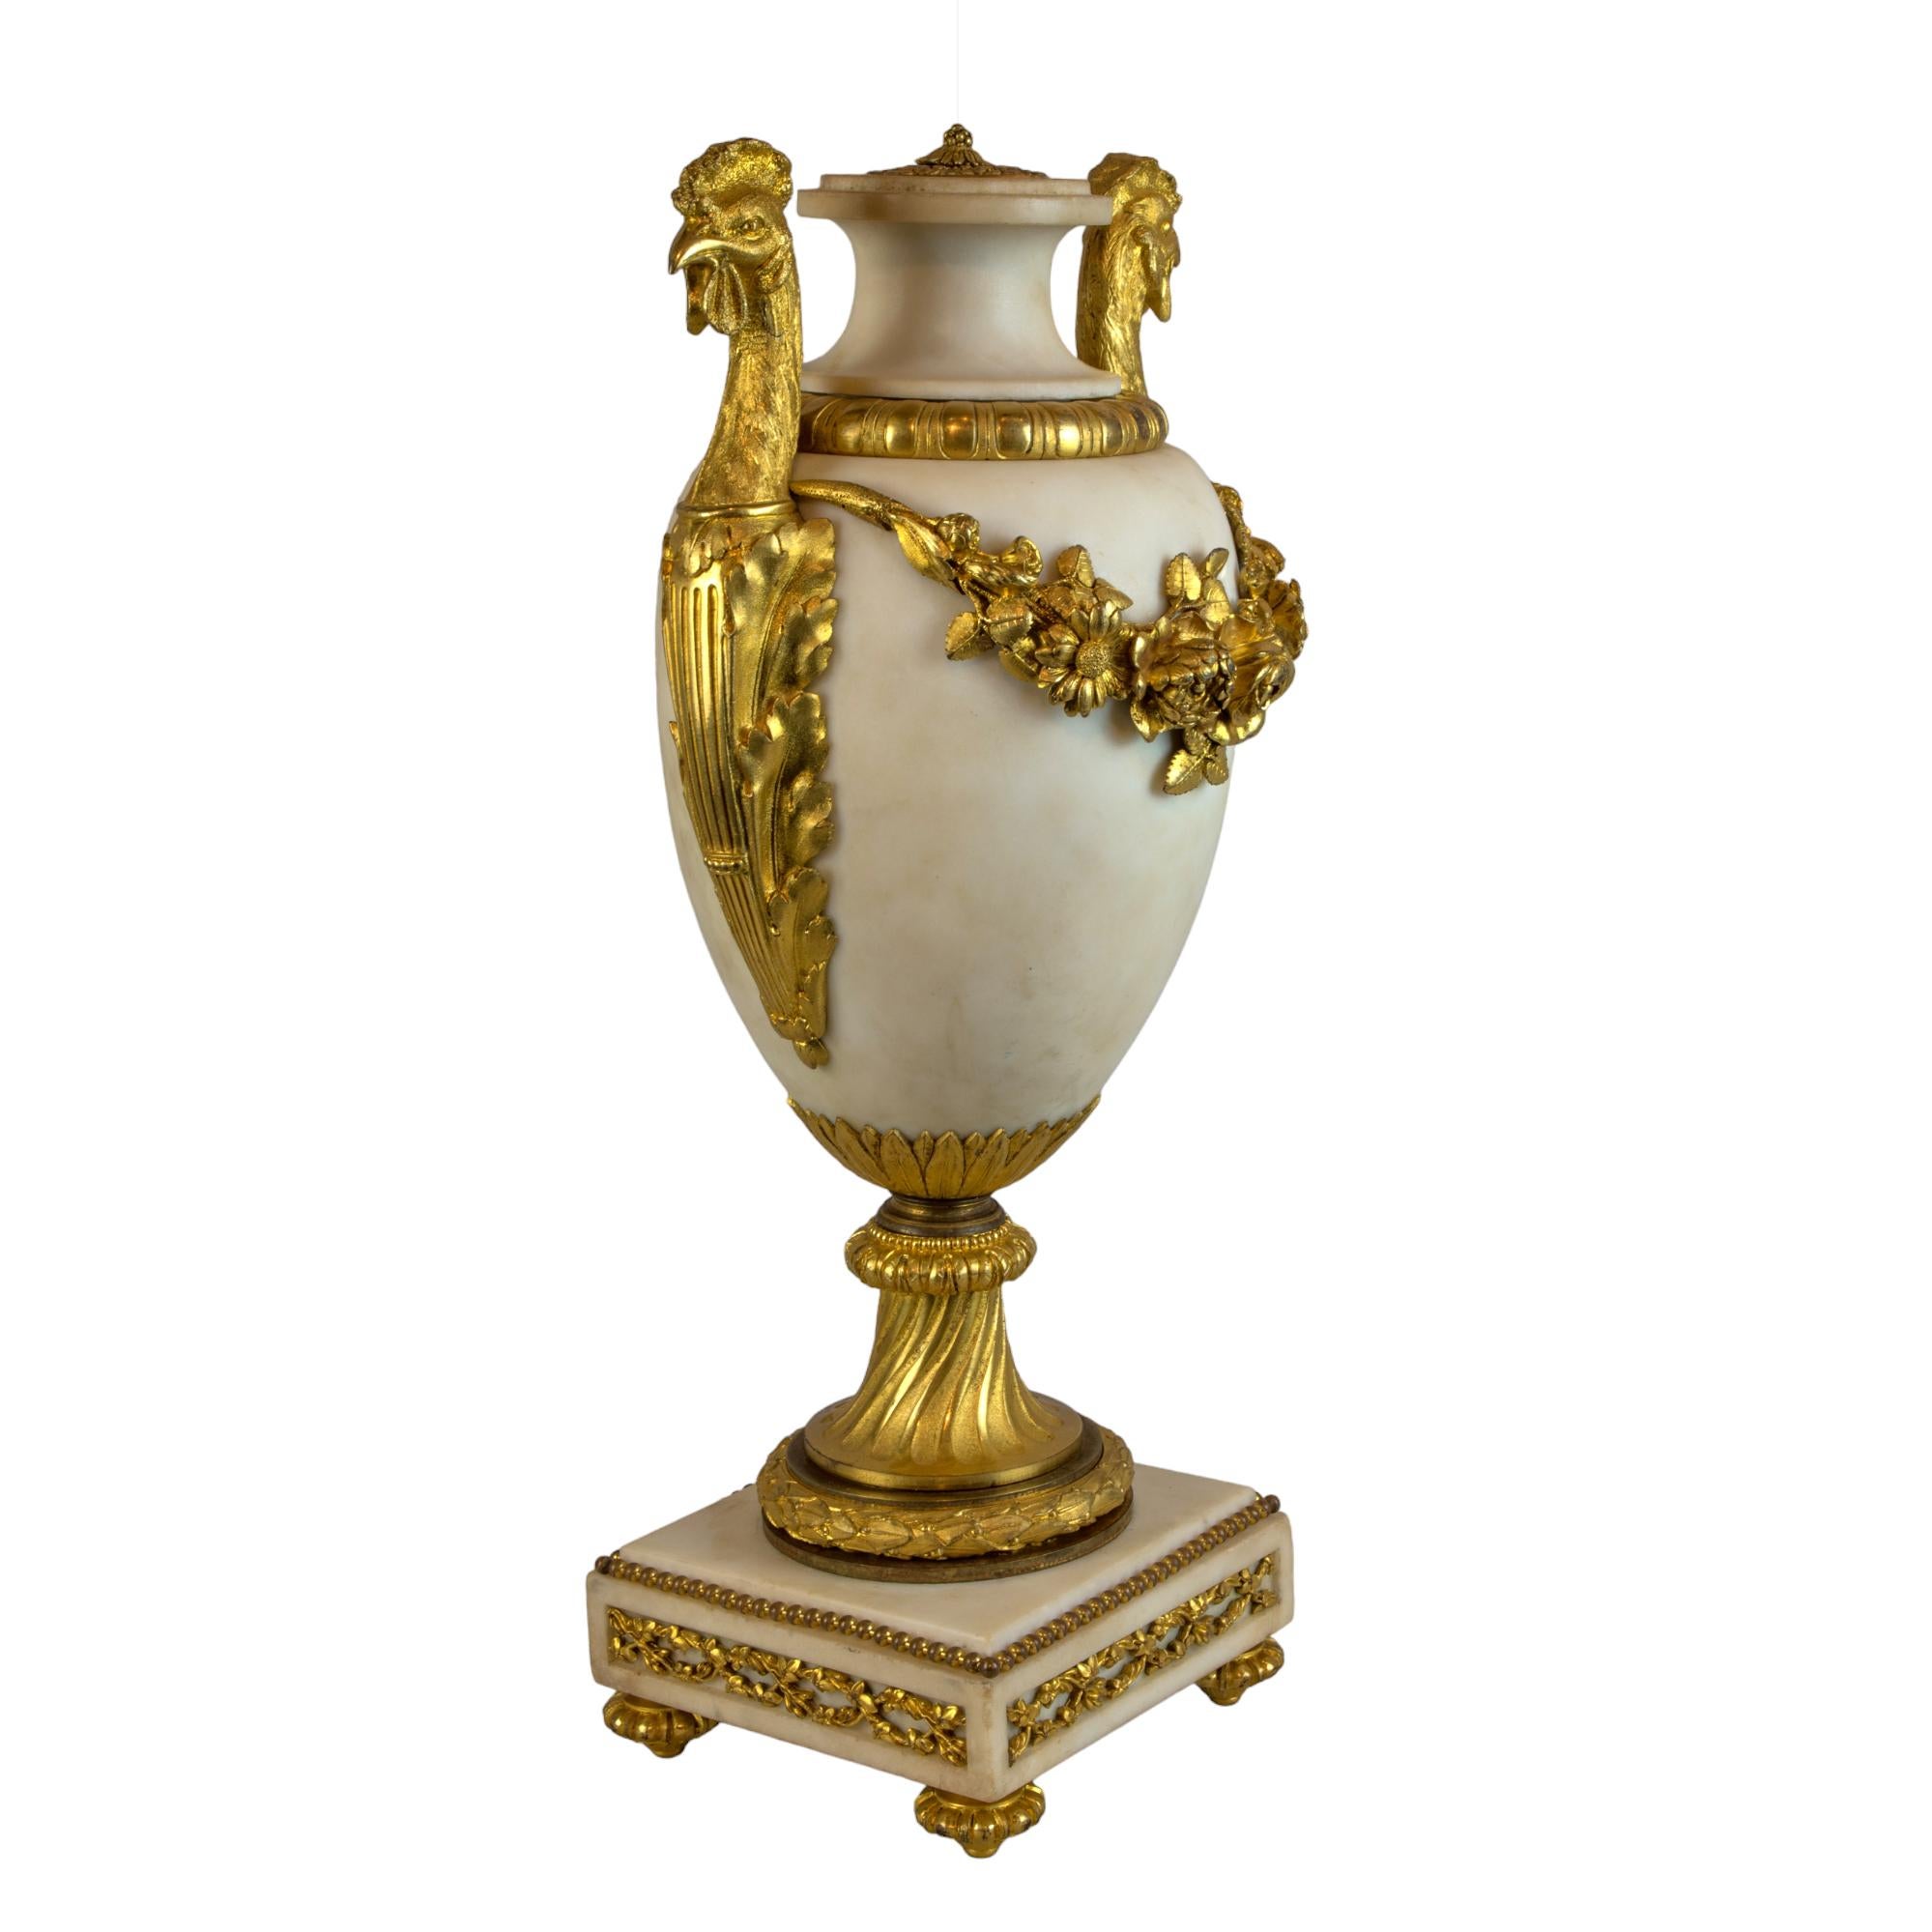 Magnificent Pair of Louis XVI Style Gilt-Bronze-Mounted White Marble Urns In Good Condition For Sale In New York, NY